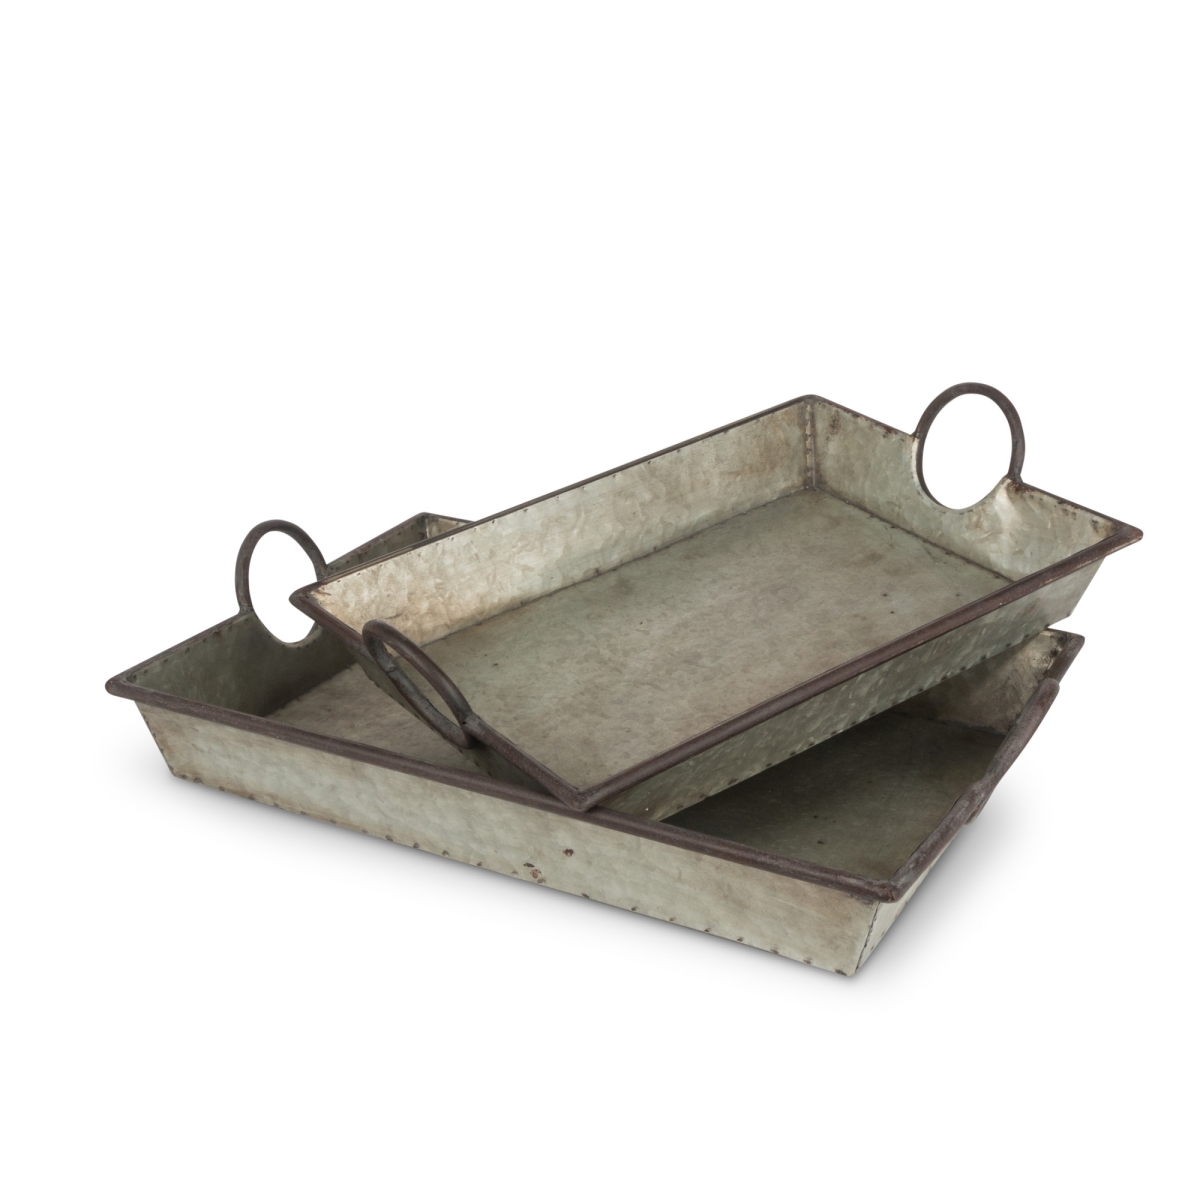 Gerson 94345ec Assorted Rustic Galvanized Metal Trays With Round Handles - Grey - Set Of 2